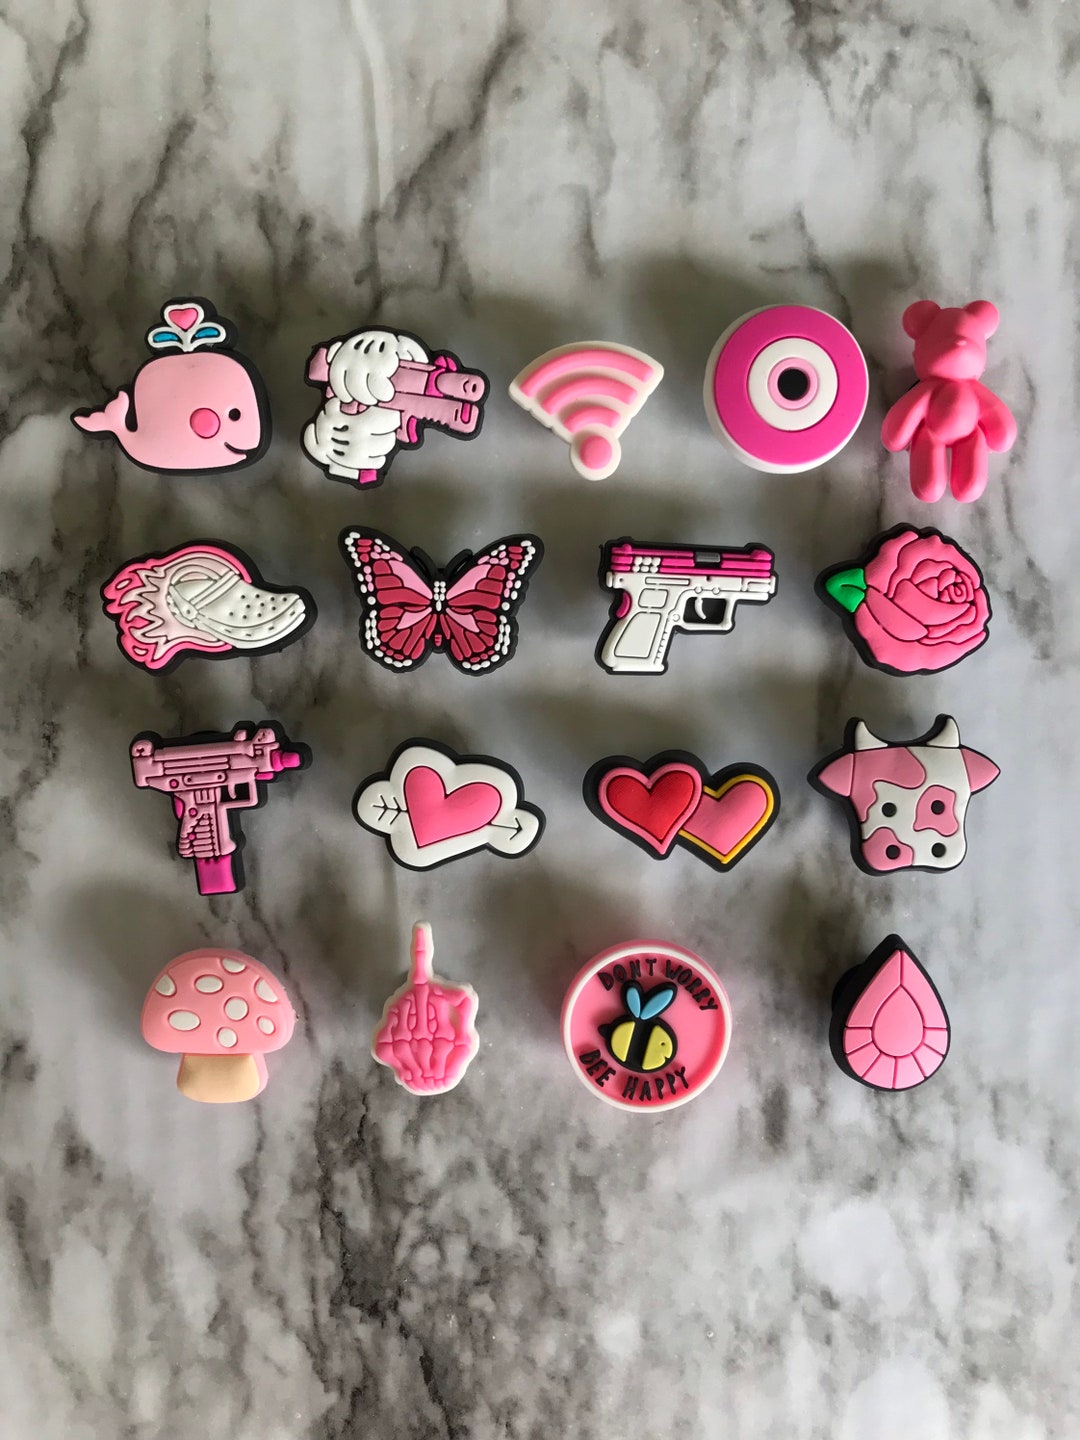 Hot Selling Pink Cowboy Series Pvc Croc Charms Custom Boots Charms Designer  Croc Charms For Women Clogs - Buy Hot Selling Pink Cowboy Series Pvc Croc  Charms Custom Boots Charms Designer Croc